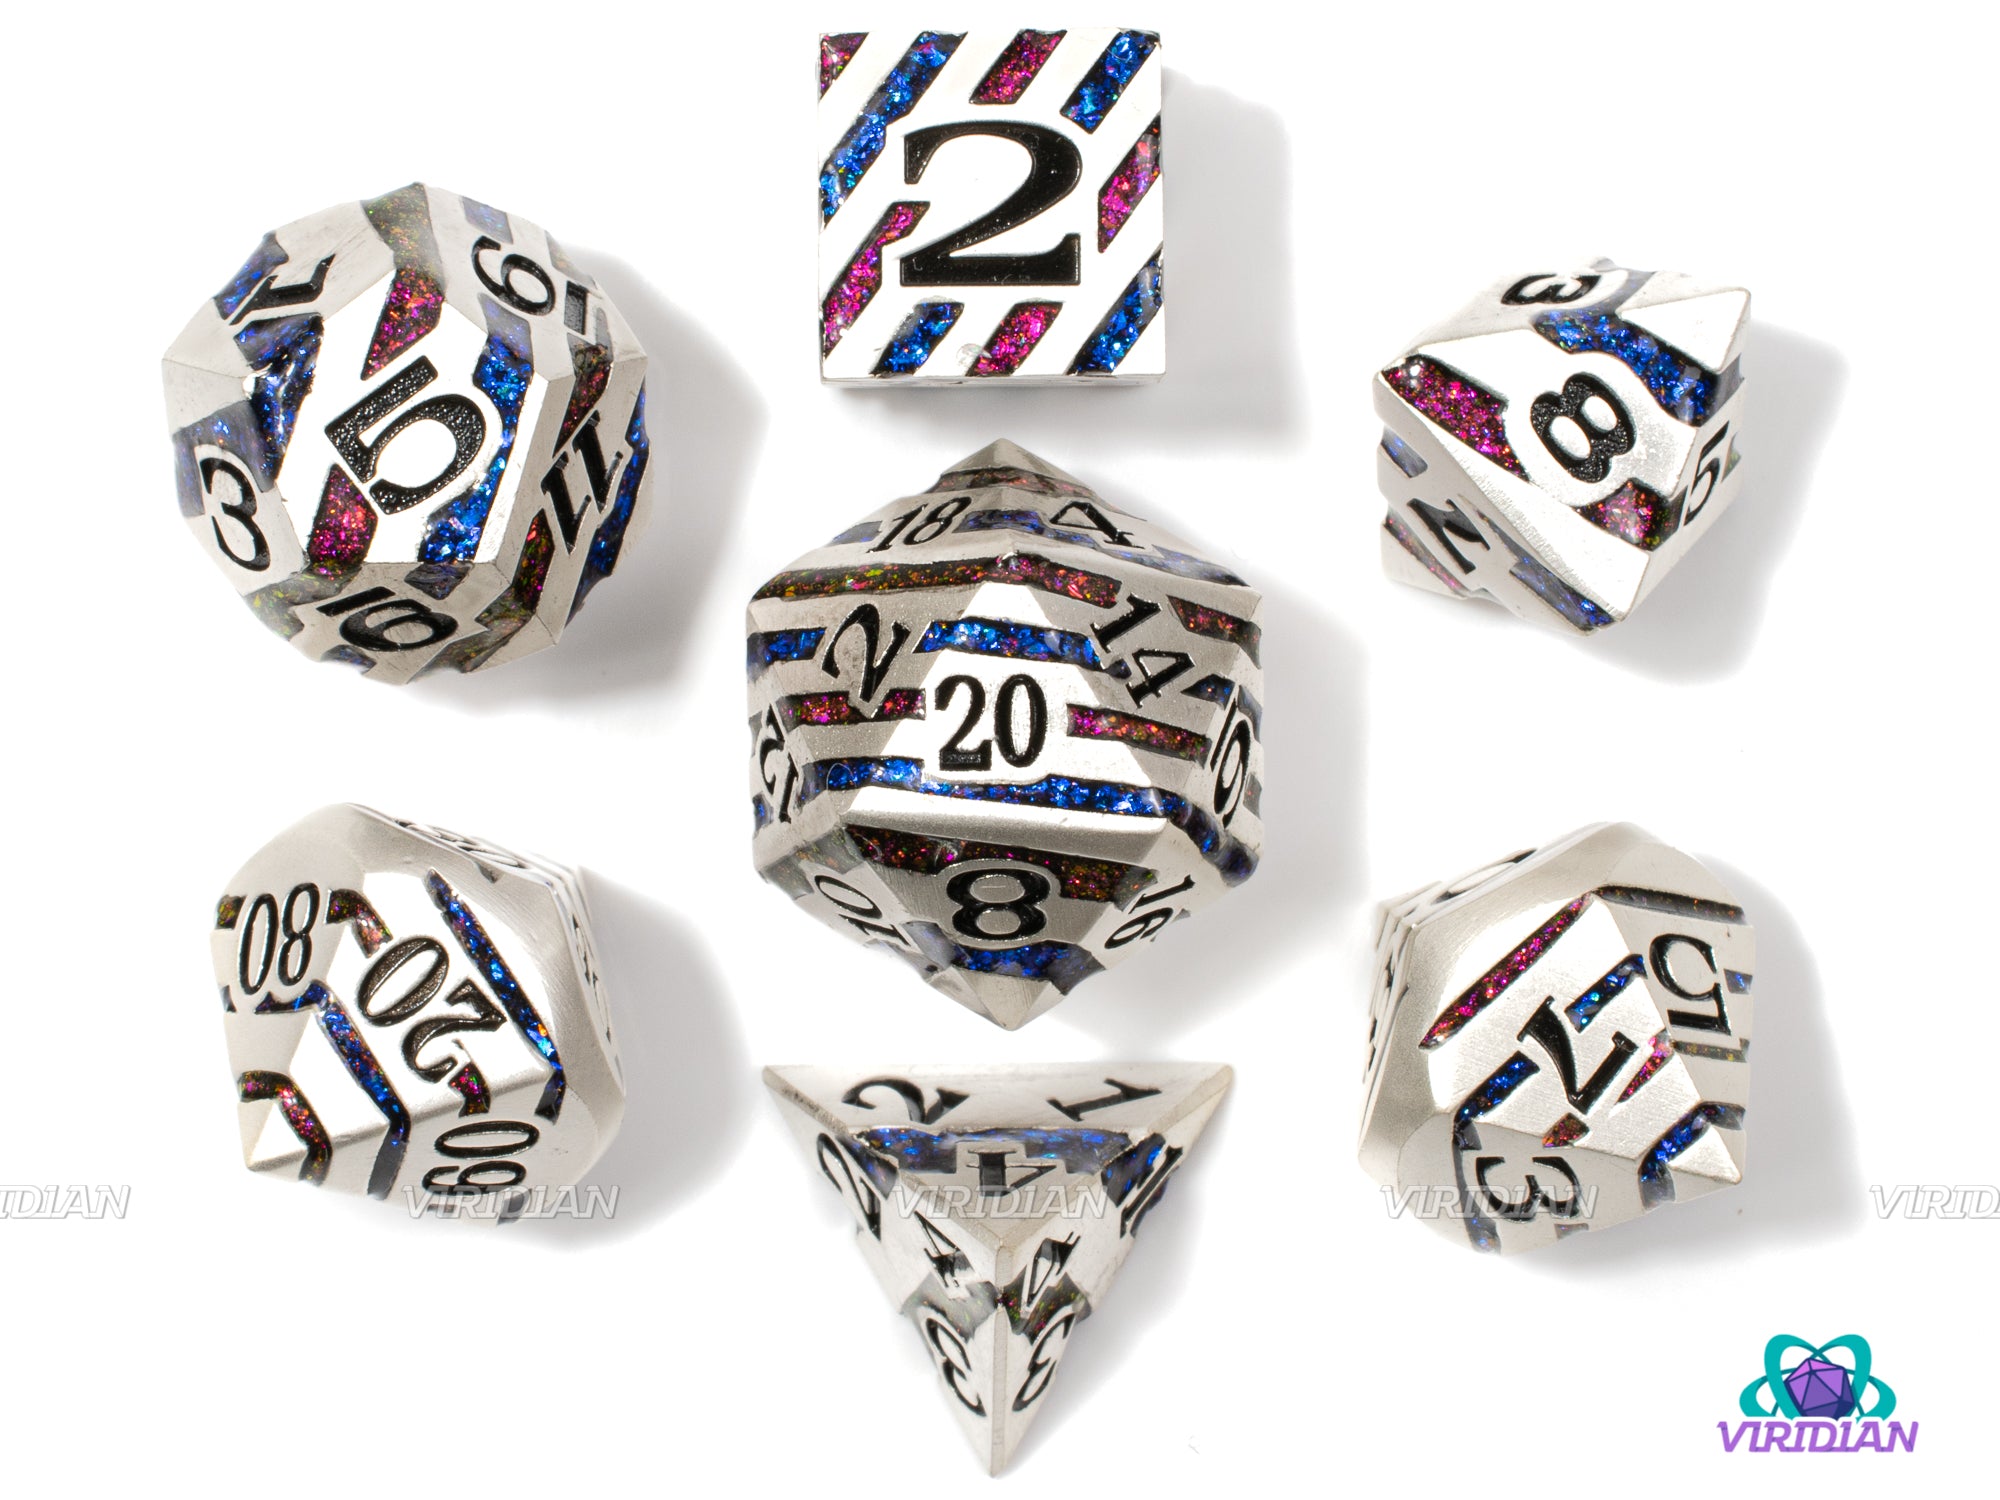 Red & Blue Stripe | Shiny Silver Metal Mica Glitter | Metal Dice Set (7) | Dungeons and Dragons (DnD)